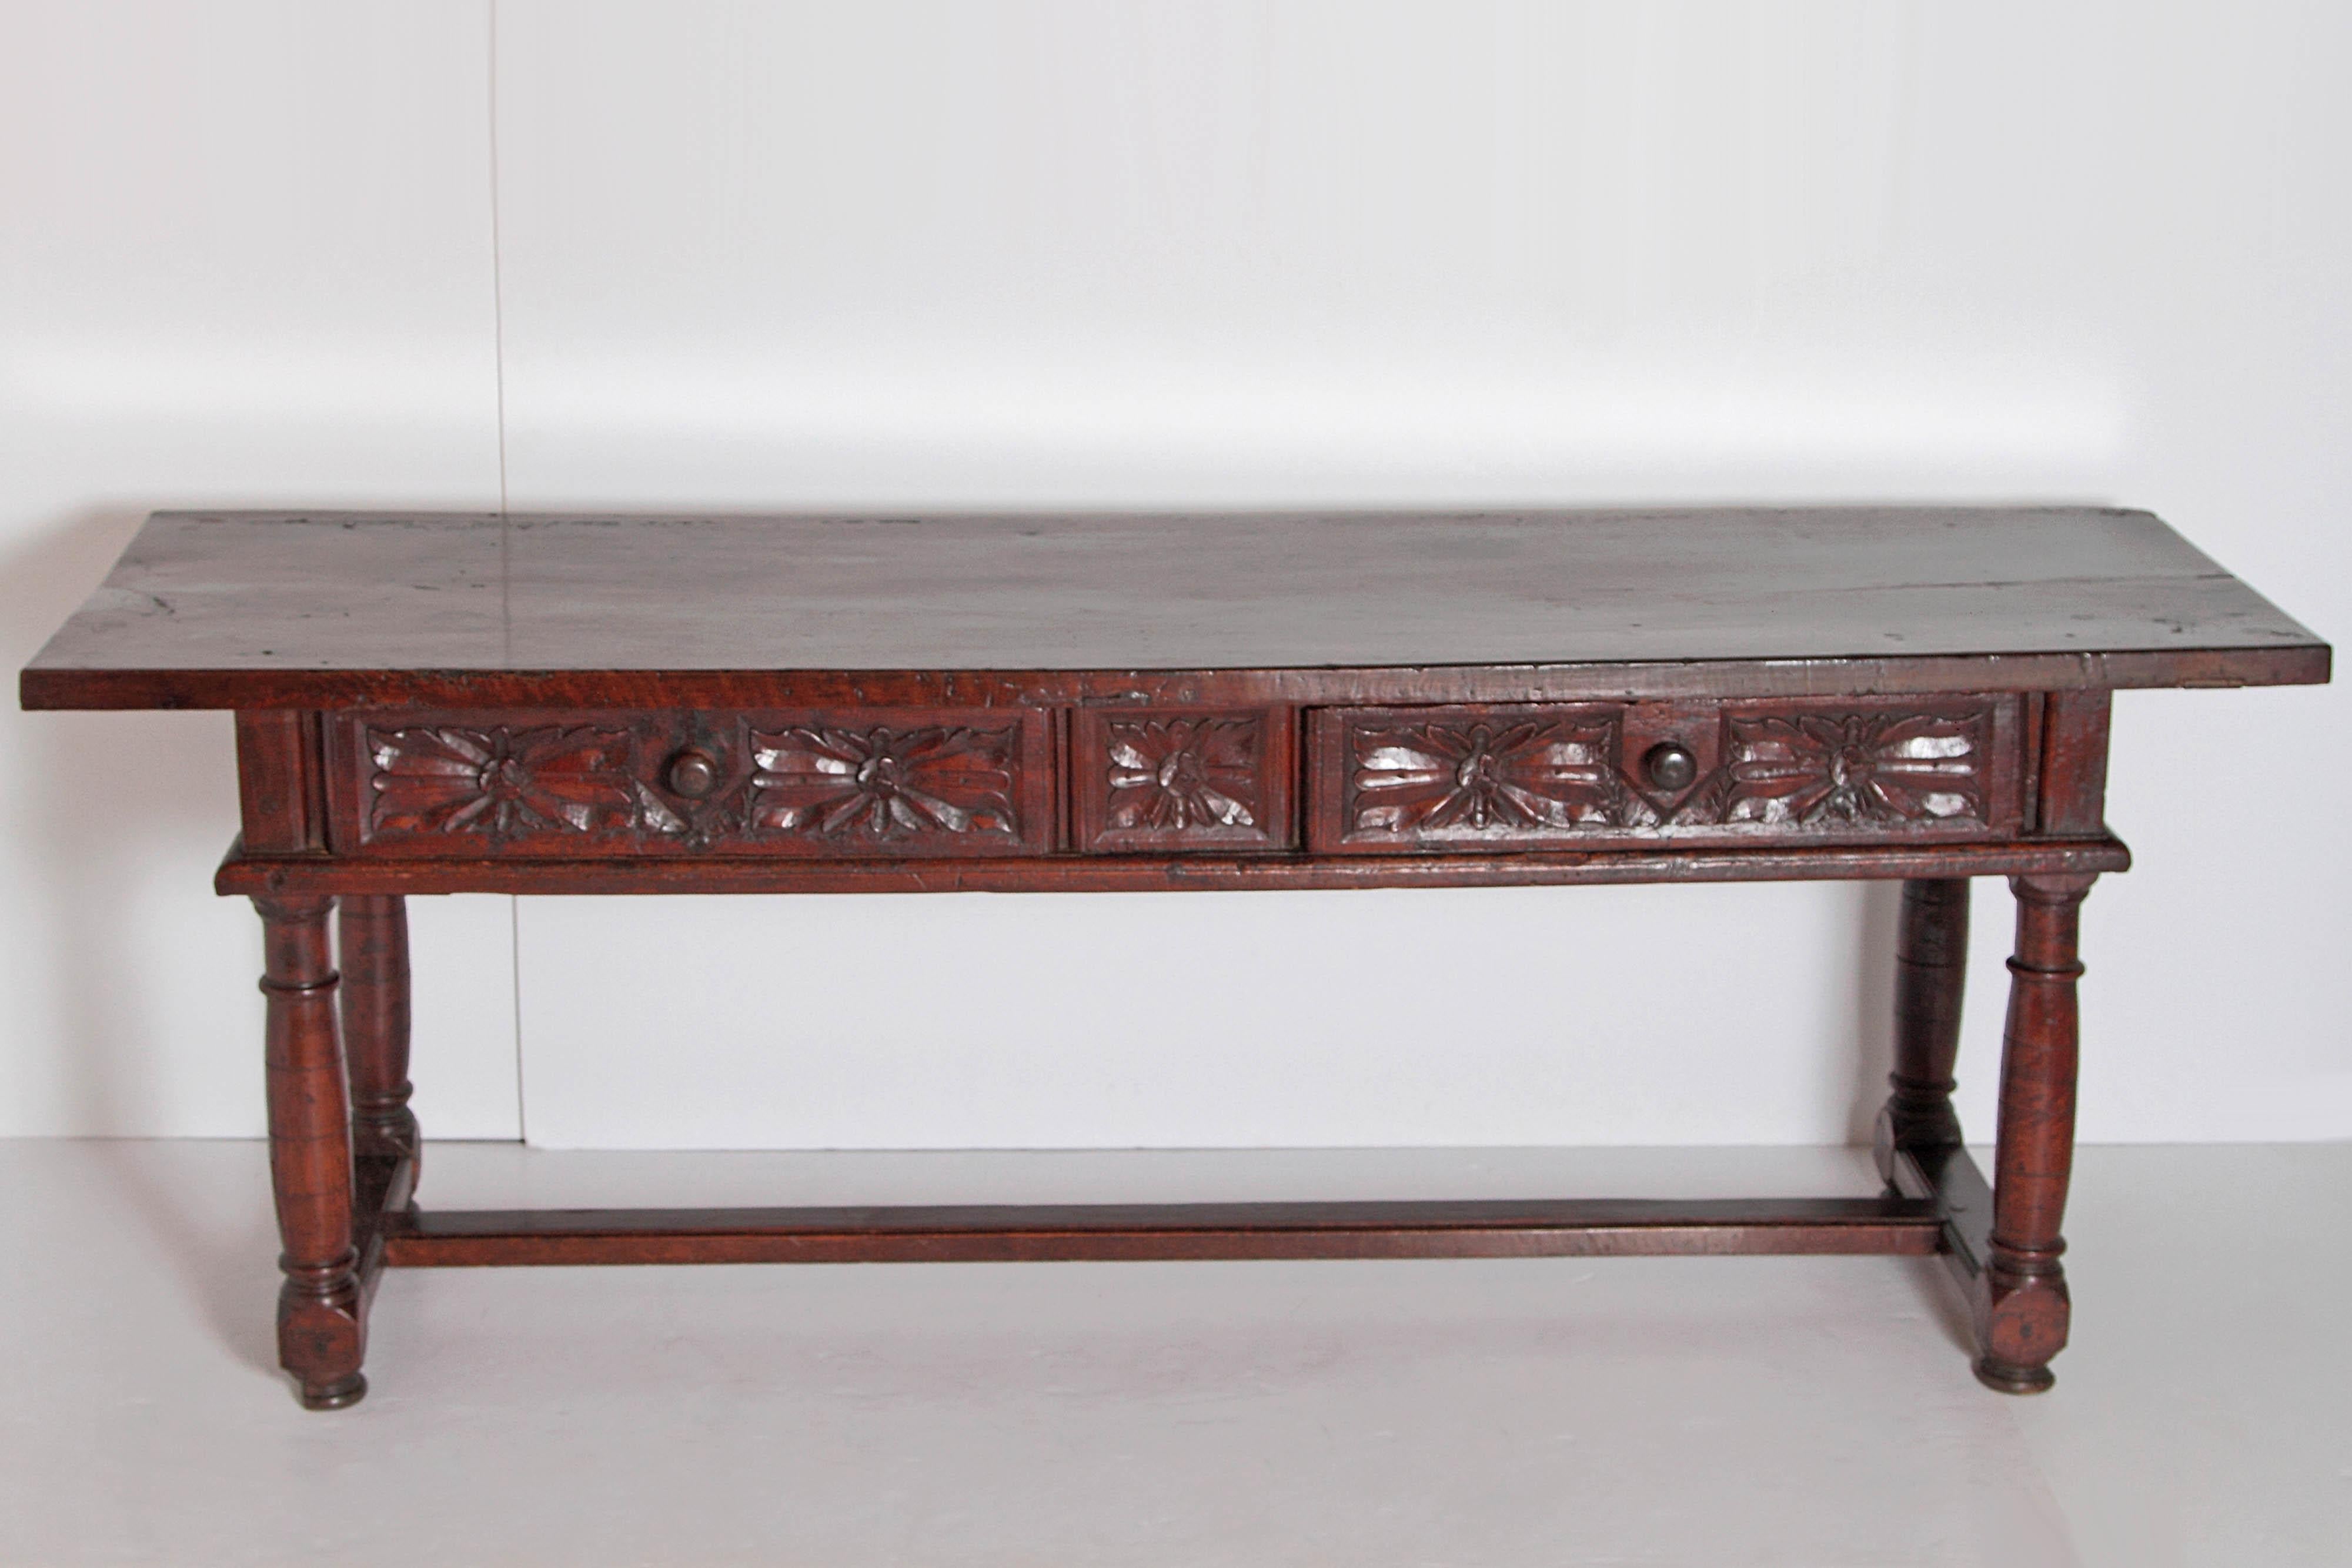 A fine example of a 17th century Spanish hand carved walnut table. A large single board top above two drawers heavily carved with wooden knobs. The sides and back apron are also nicely carved. Beautiful original color and patina. Standing on trestle